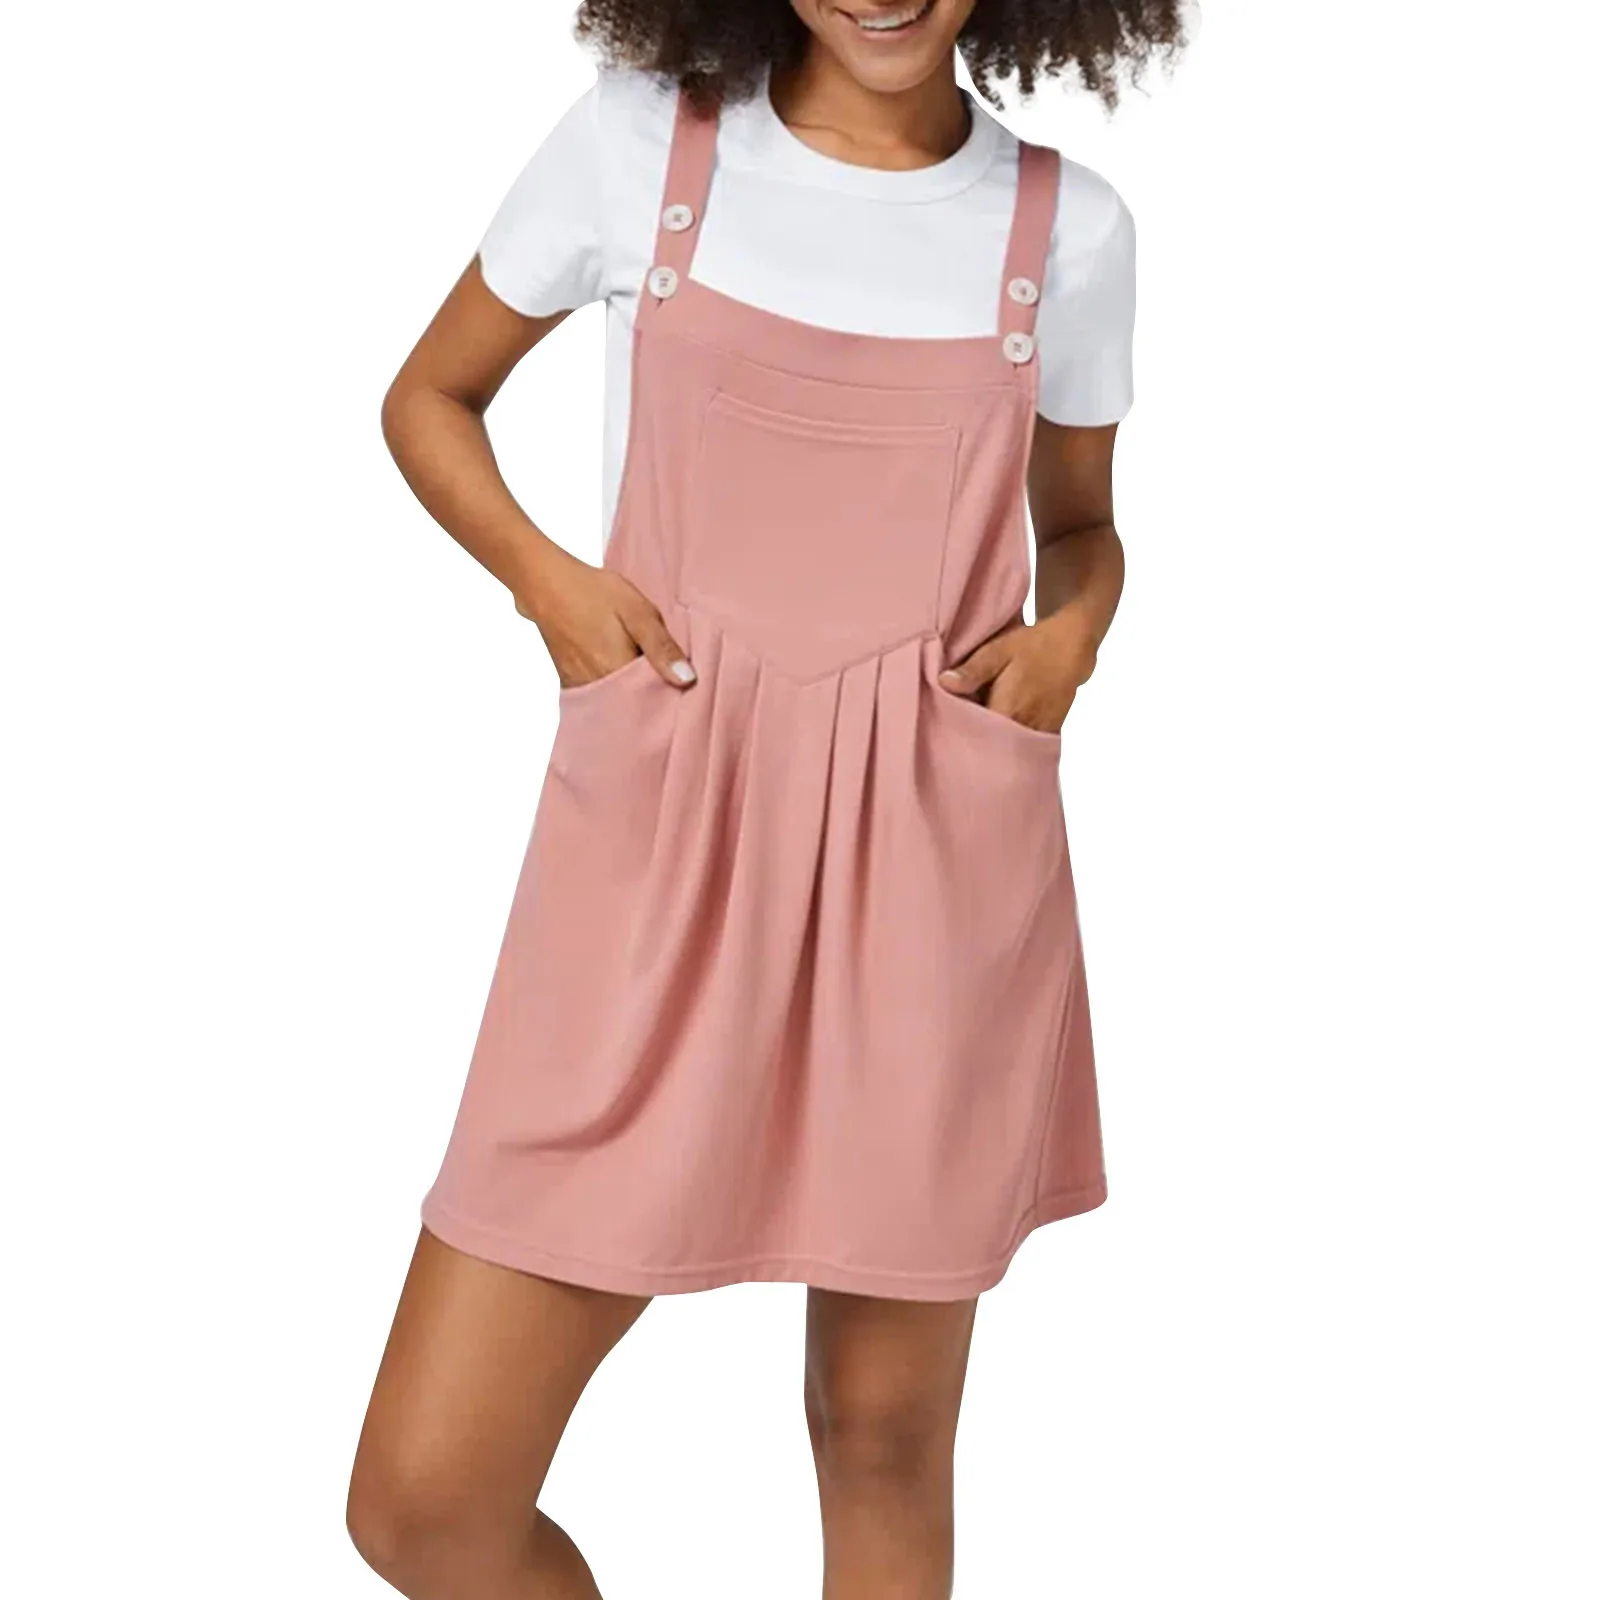 

Relaxed Dungaree Dress With Adjustable Straps Daily Casual Loose Solid Color Mini Bib Dress With Buttons And Pockets